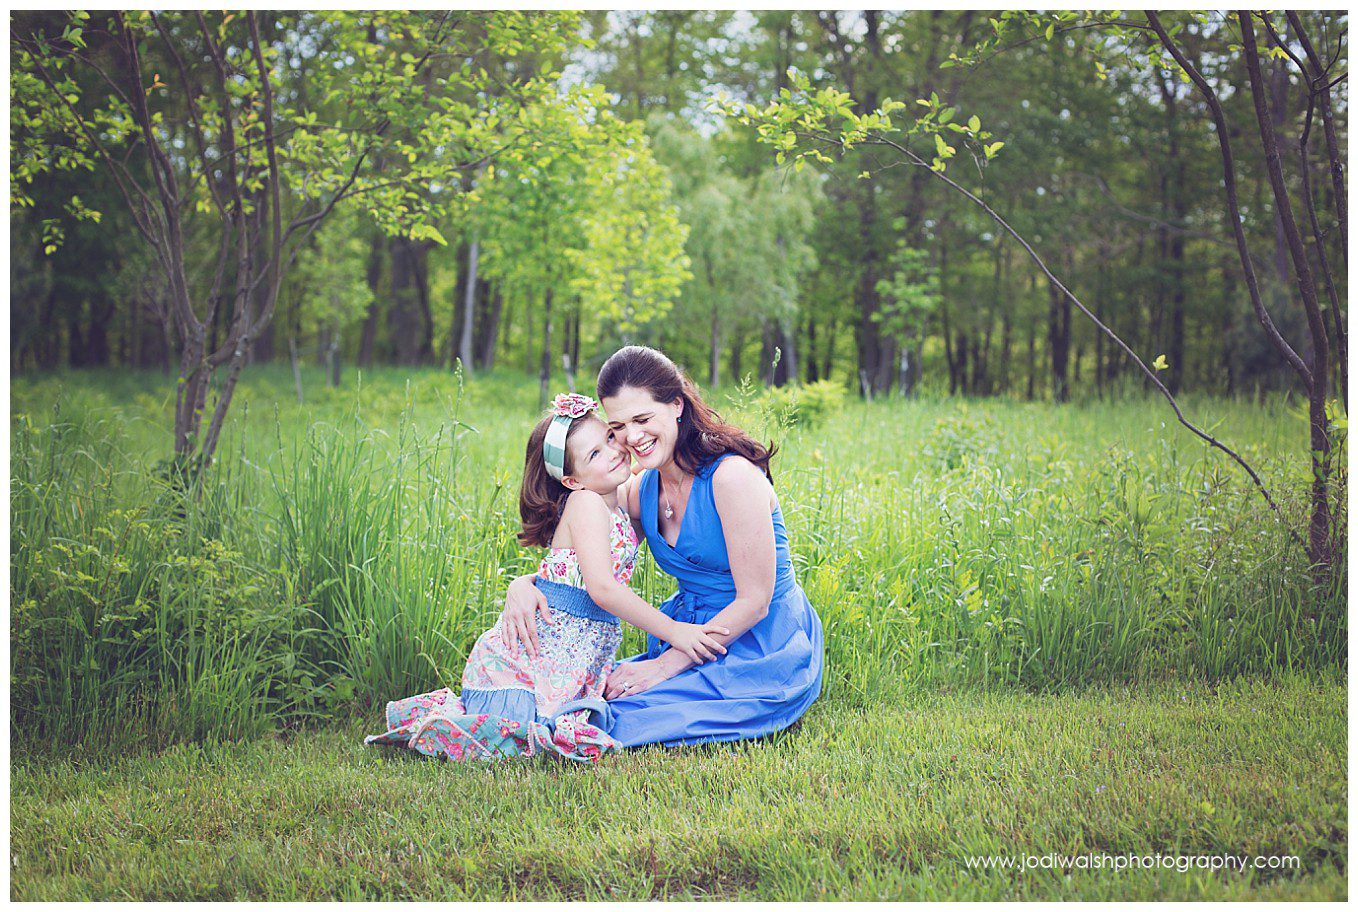 image of a mother and daughter sitting in the grass in a beautiful green park. The daughter is looking up at her mother and grinning. The mother is looking down and laughing.